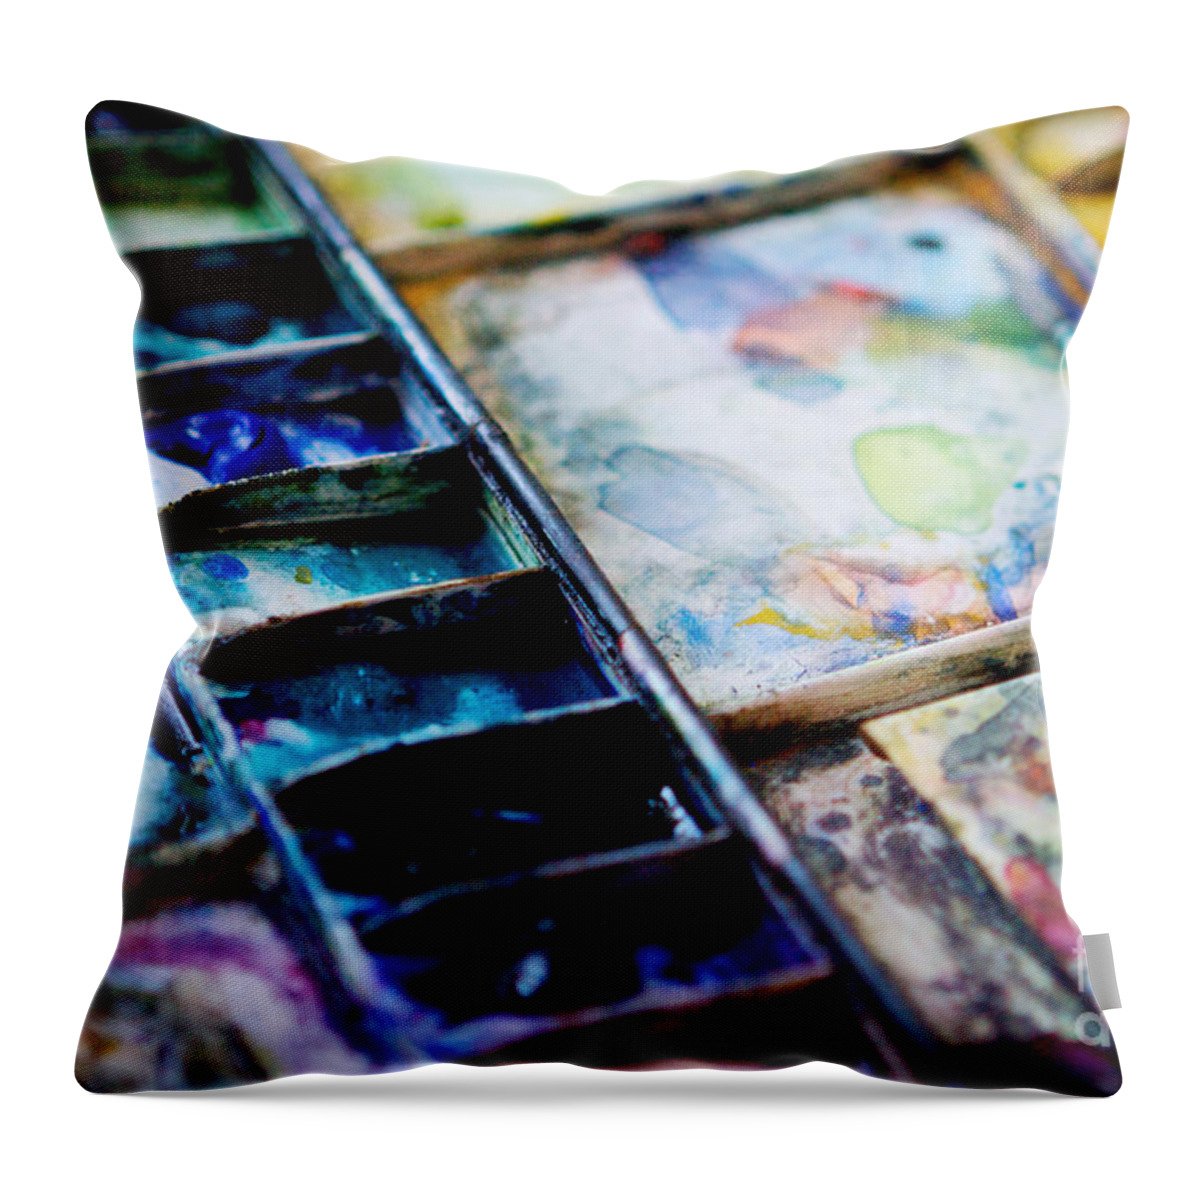 Watercolors Throw Pillow featuring the photograph Watercolors by Kim Fearheiley